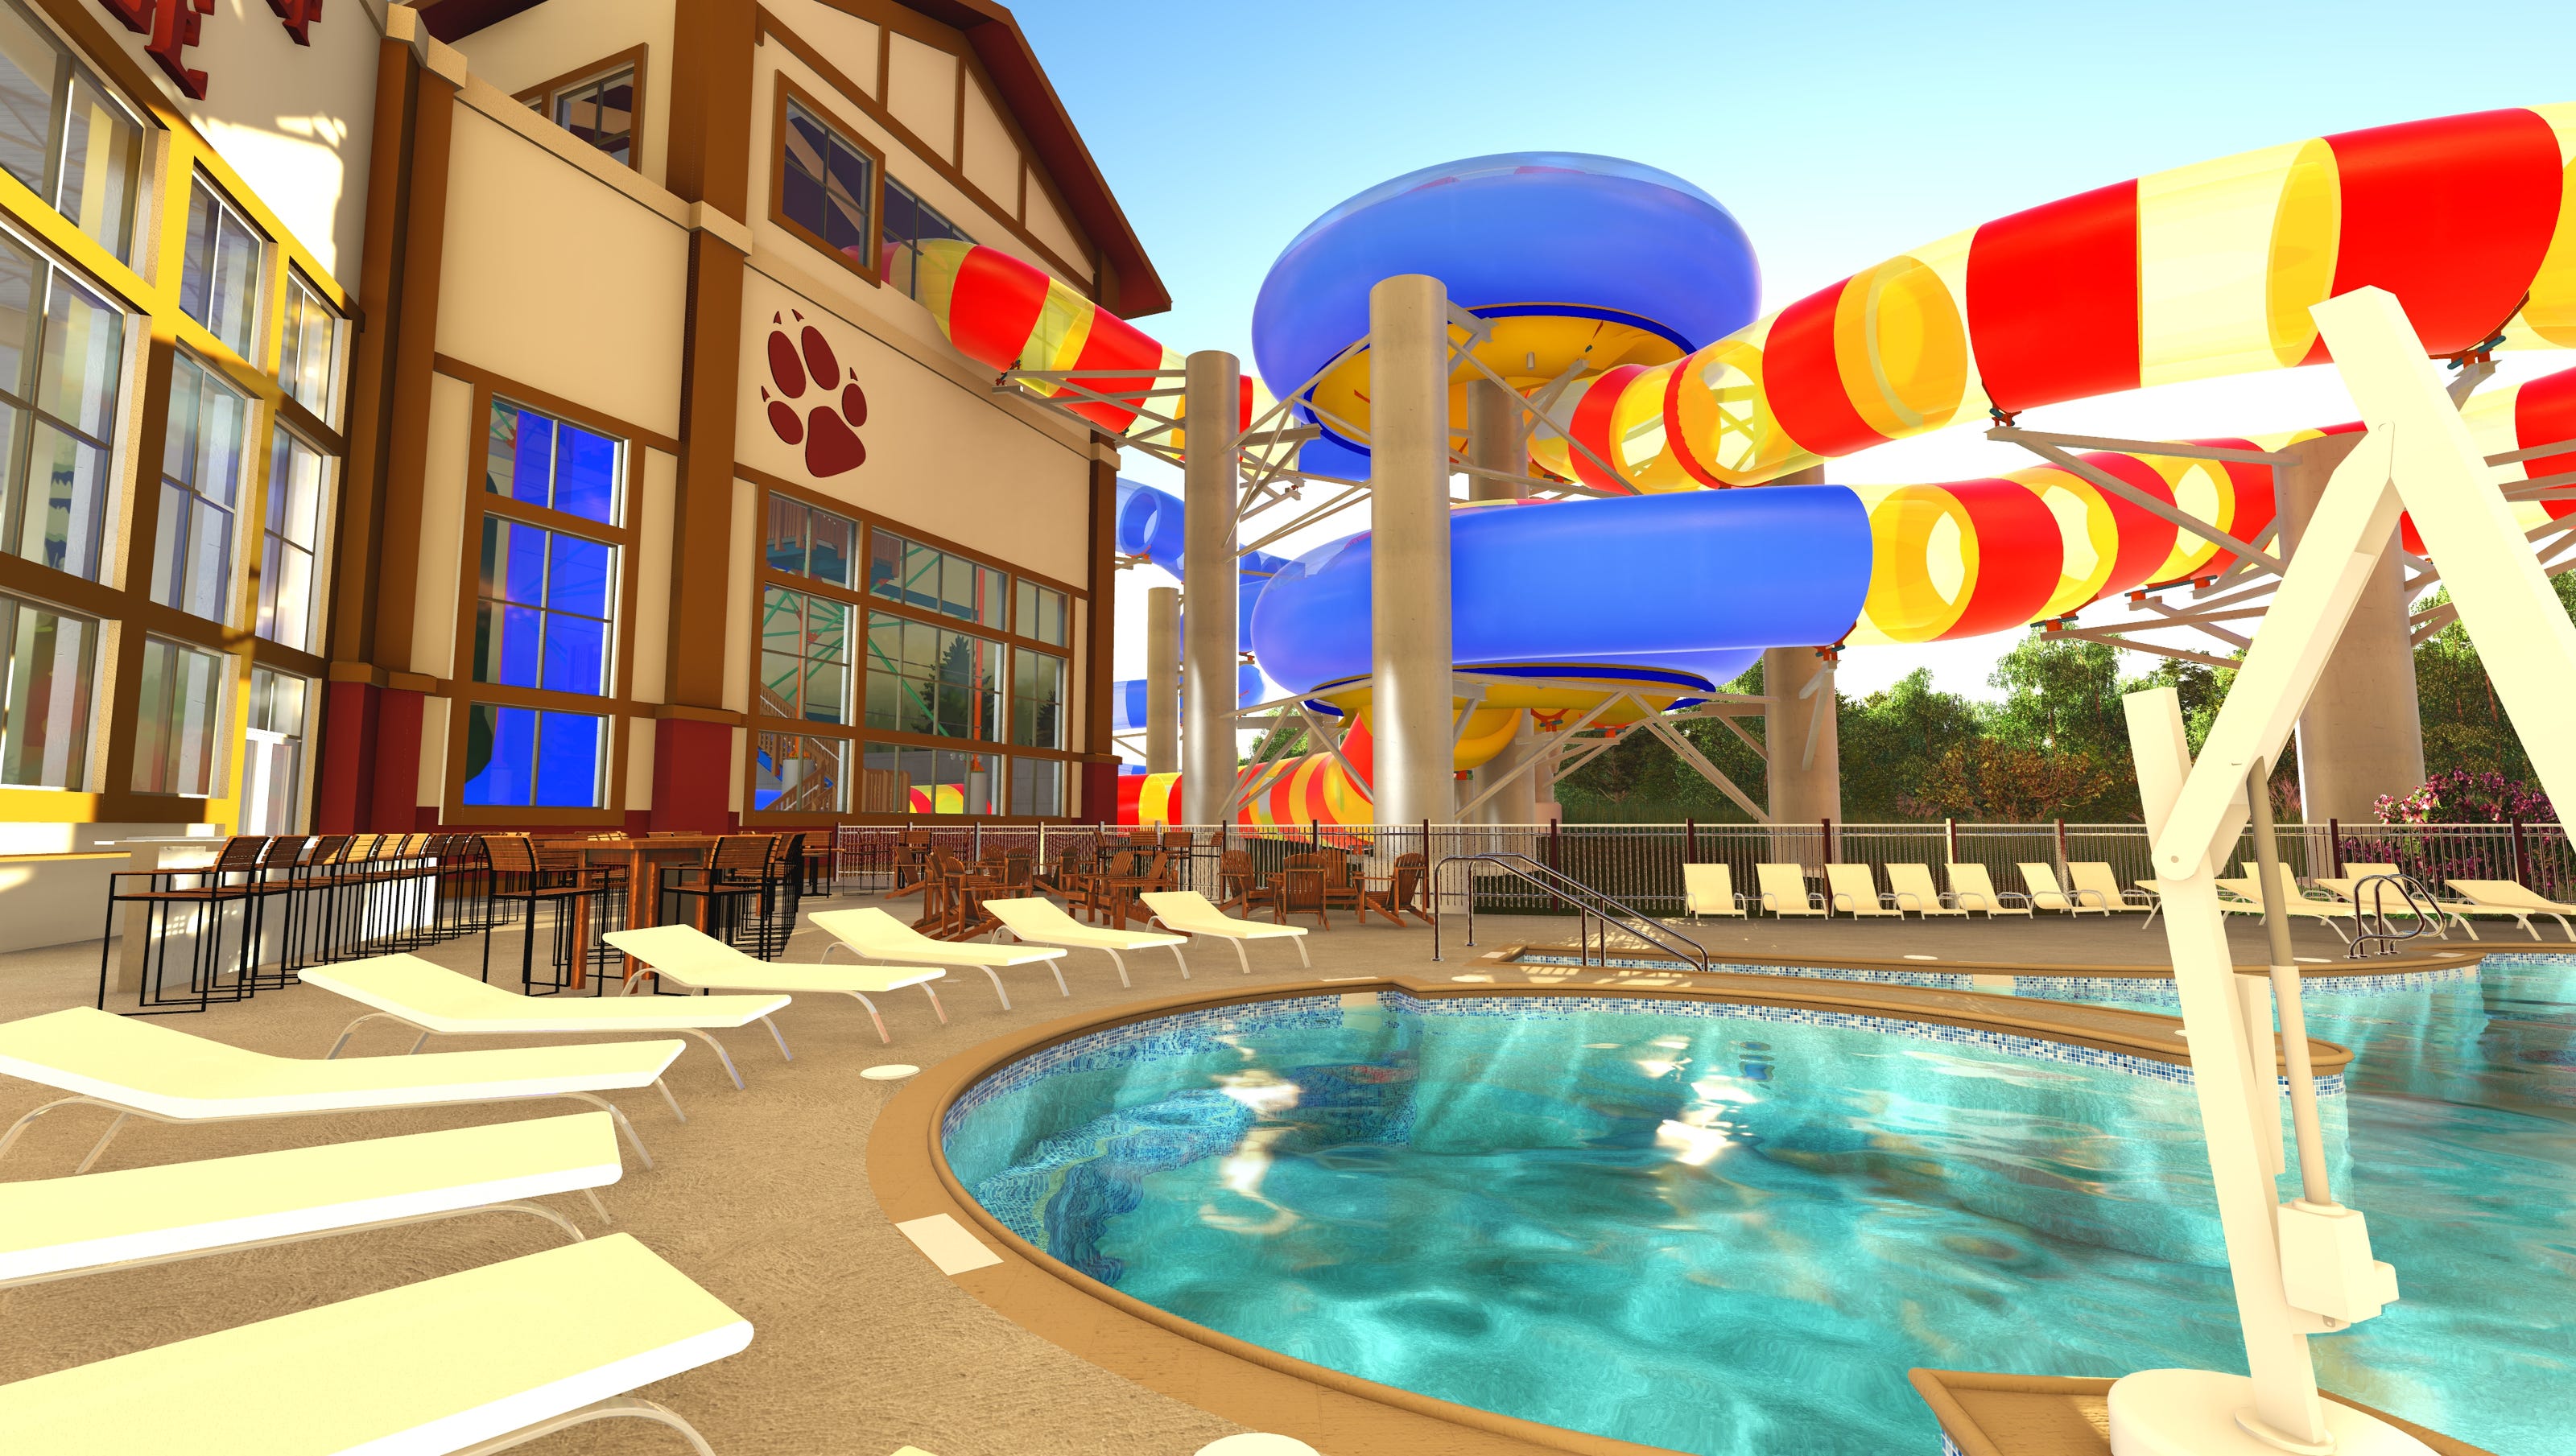 Great Wolf Lodge Illinois in Gurnee announces new family water slides